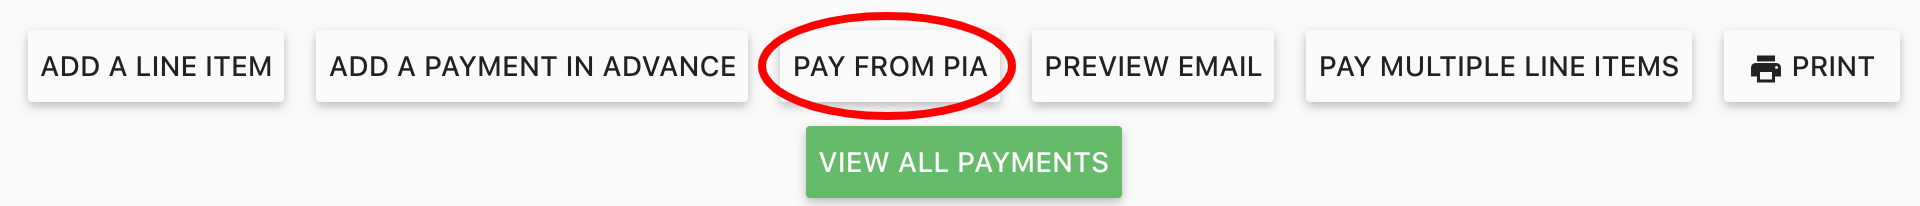 Pay_from_PIA.png